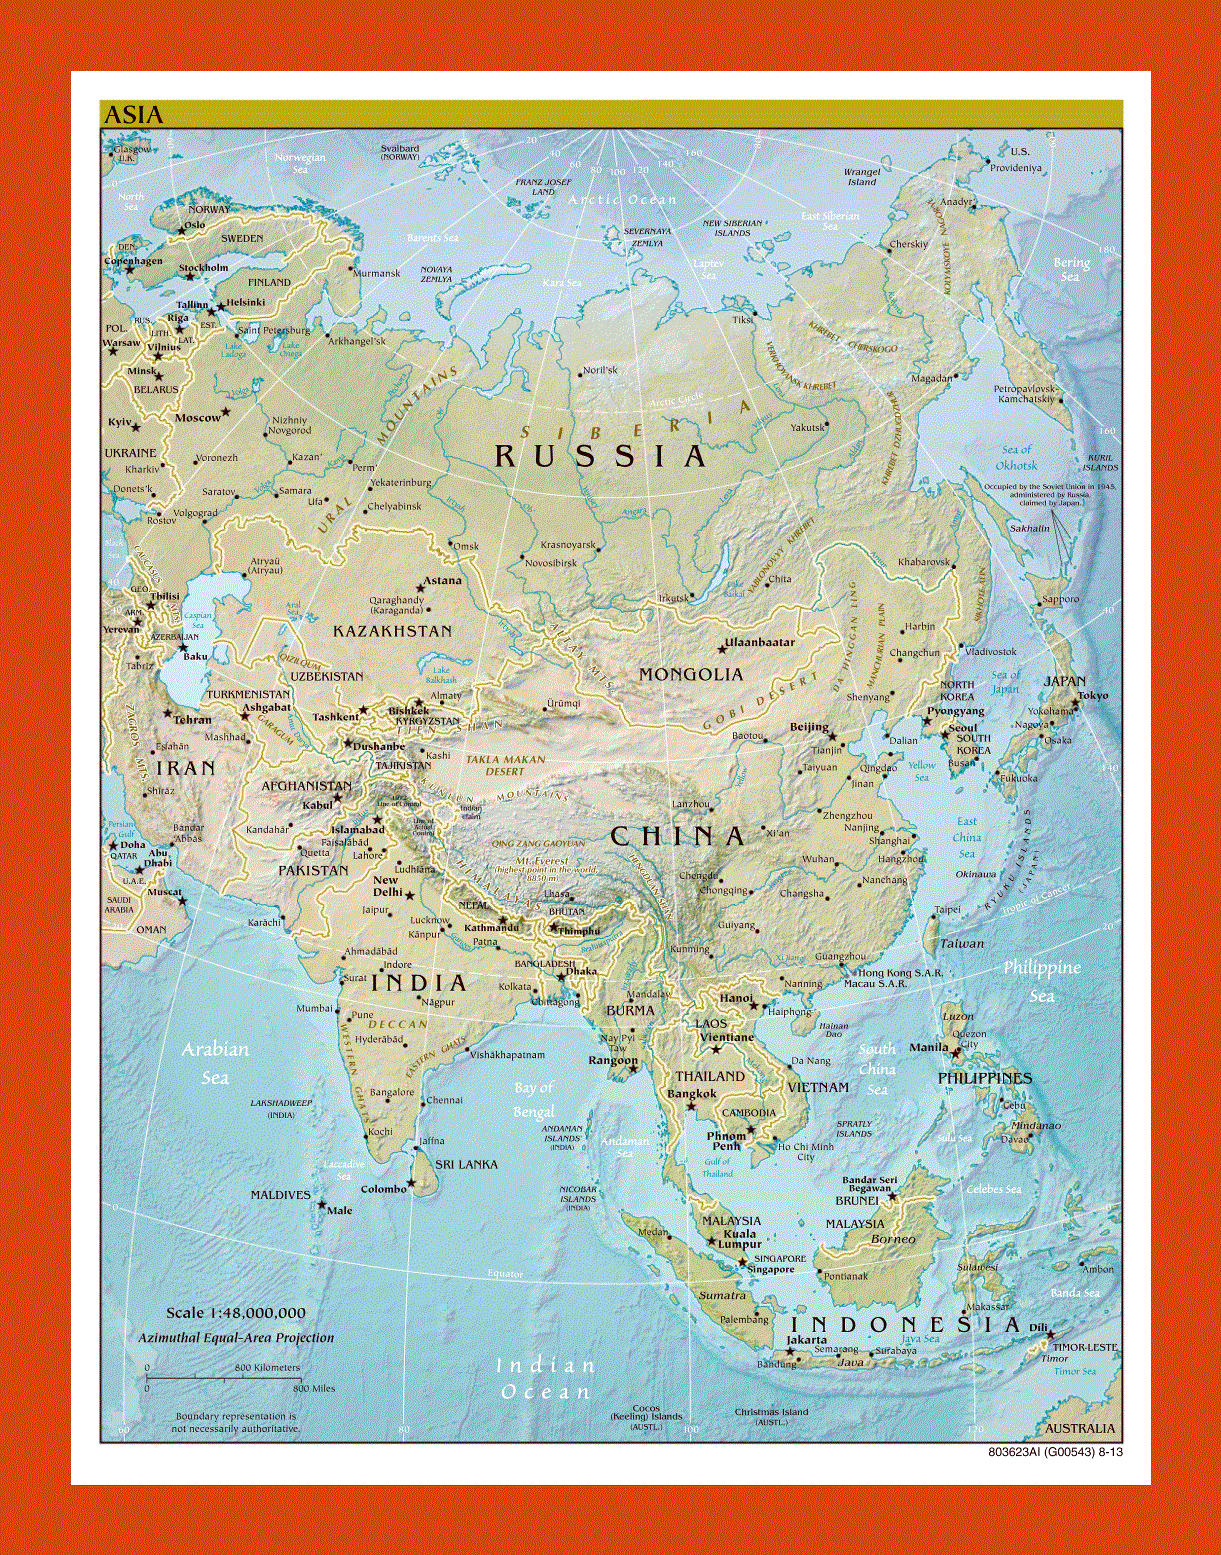 Political map of Asia - 2013